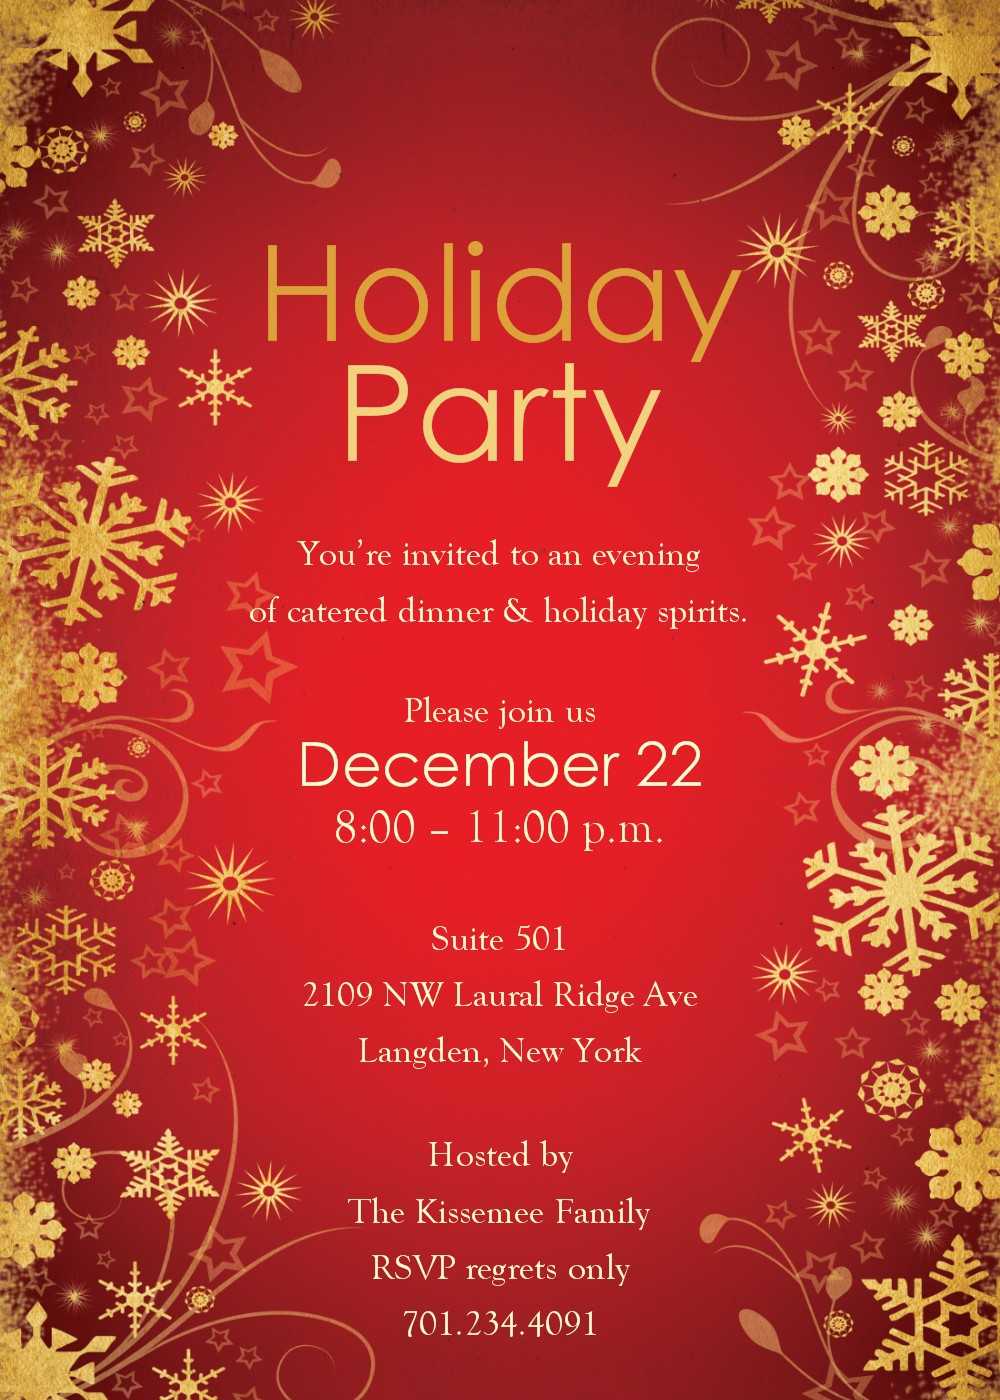 Xmas Party Invite Template Free ] – Christmas Invitation With Regard To Free Dinner Invitation Templates For Word